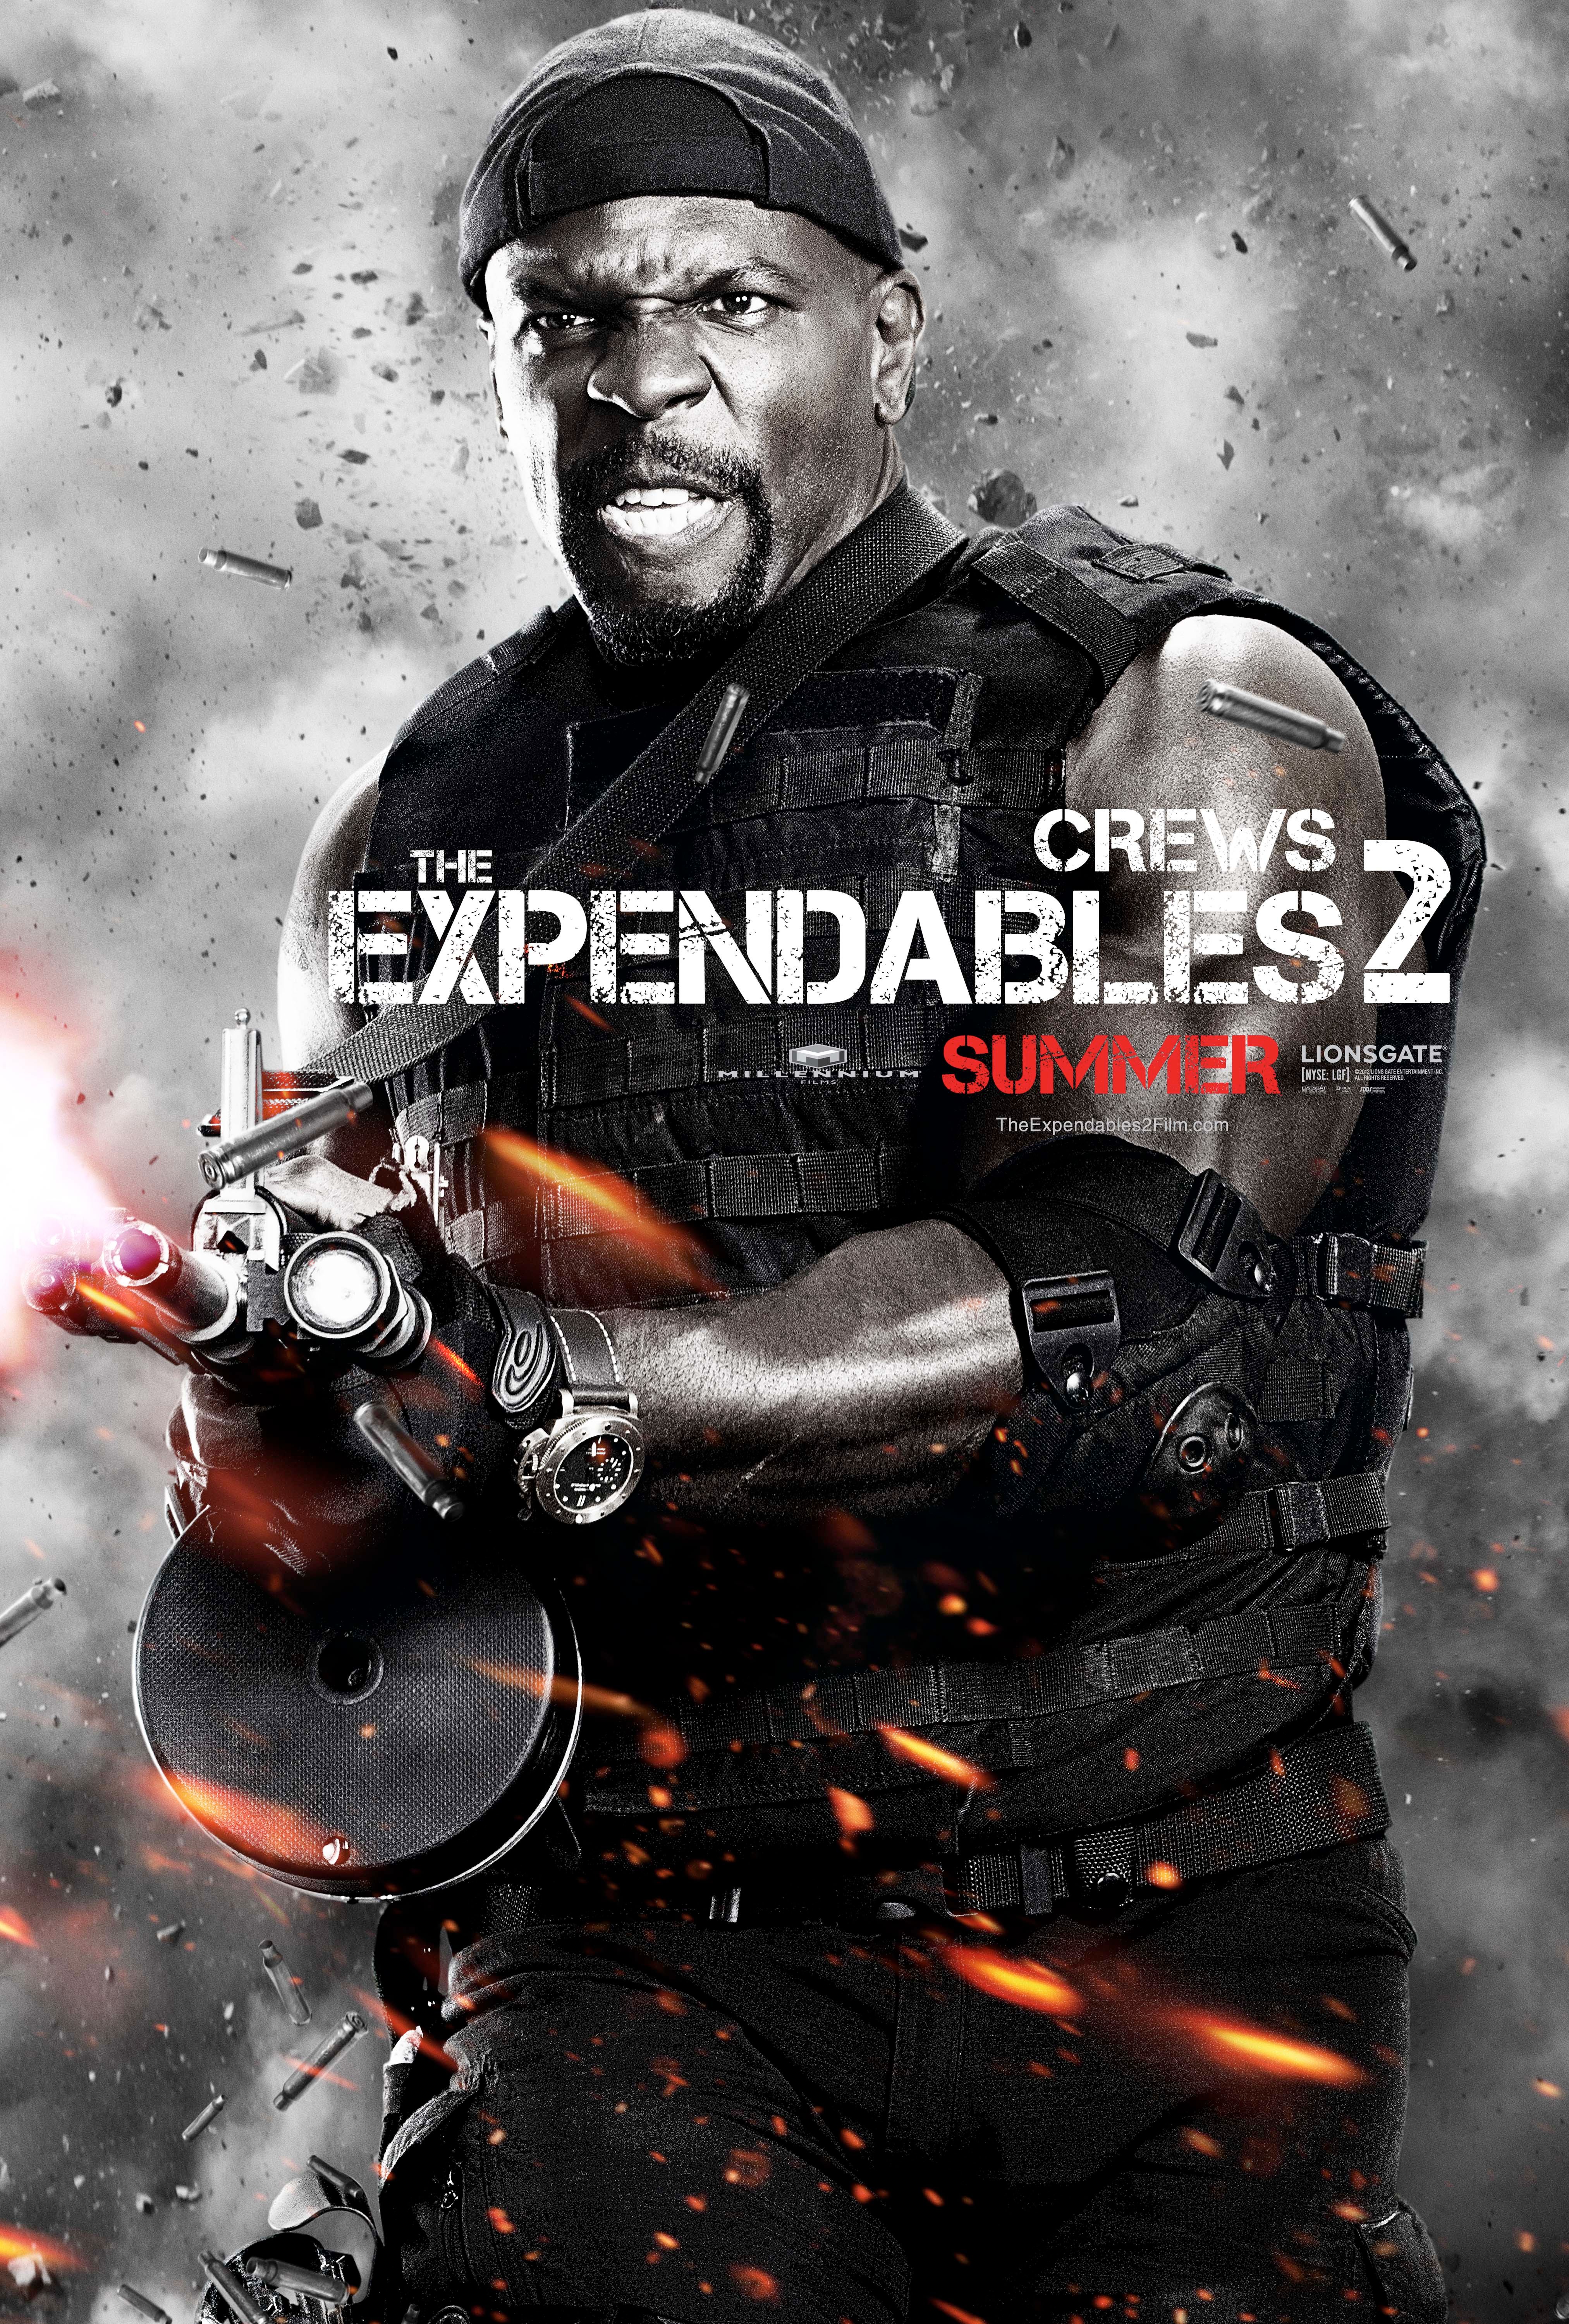 The Expendables 2 Character Poser #8